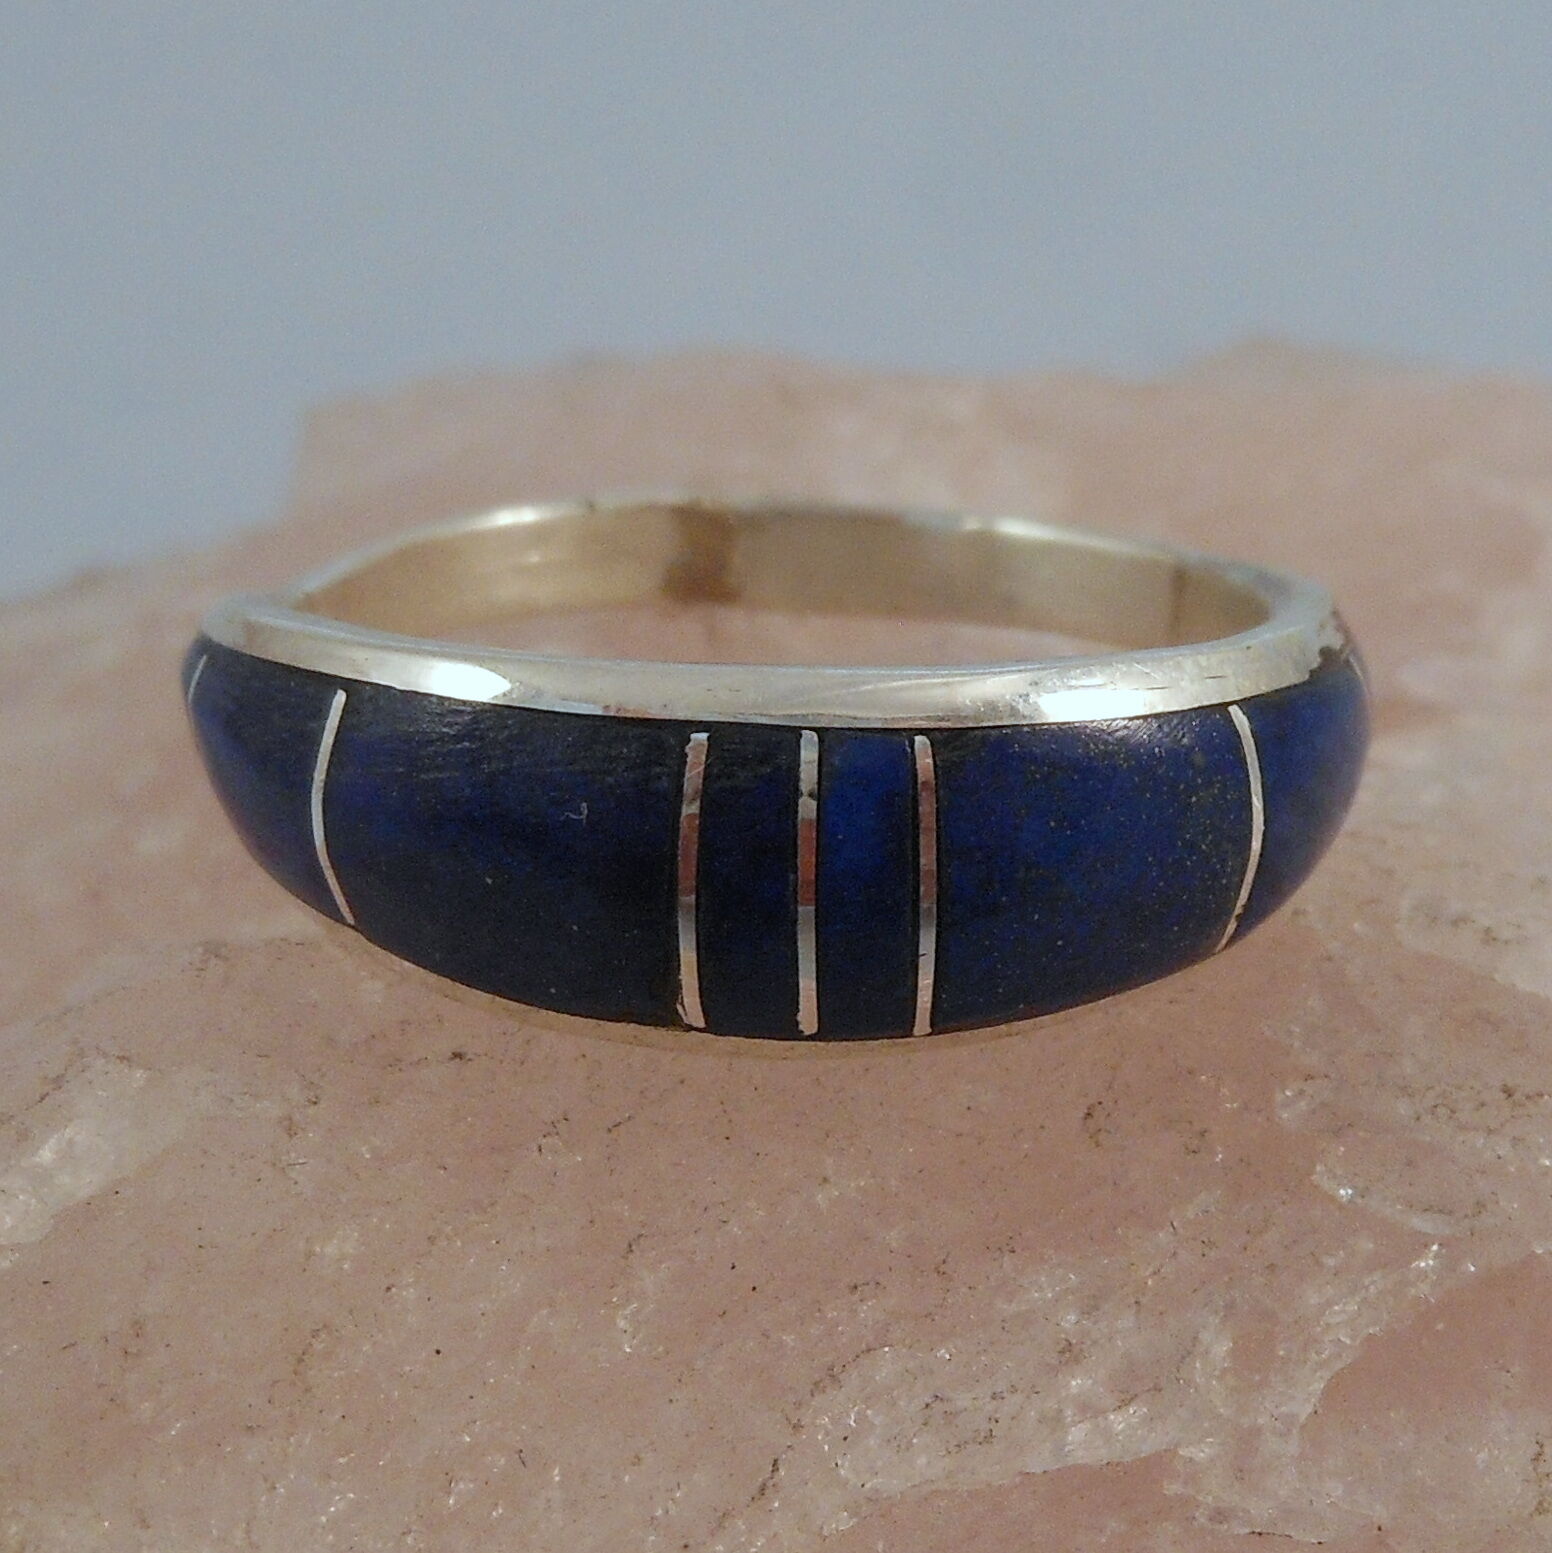  STERLING SILVER LAPIS CHANNEL INLAY RING SZ 7.25